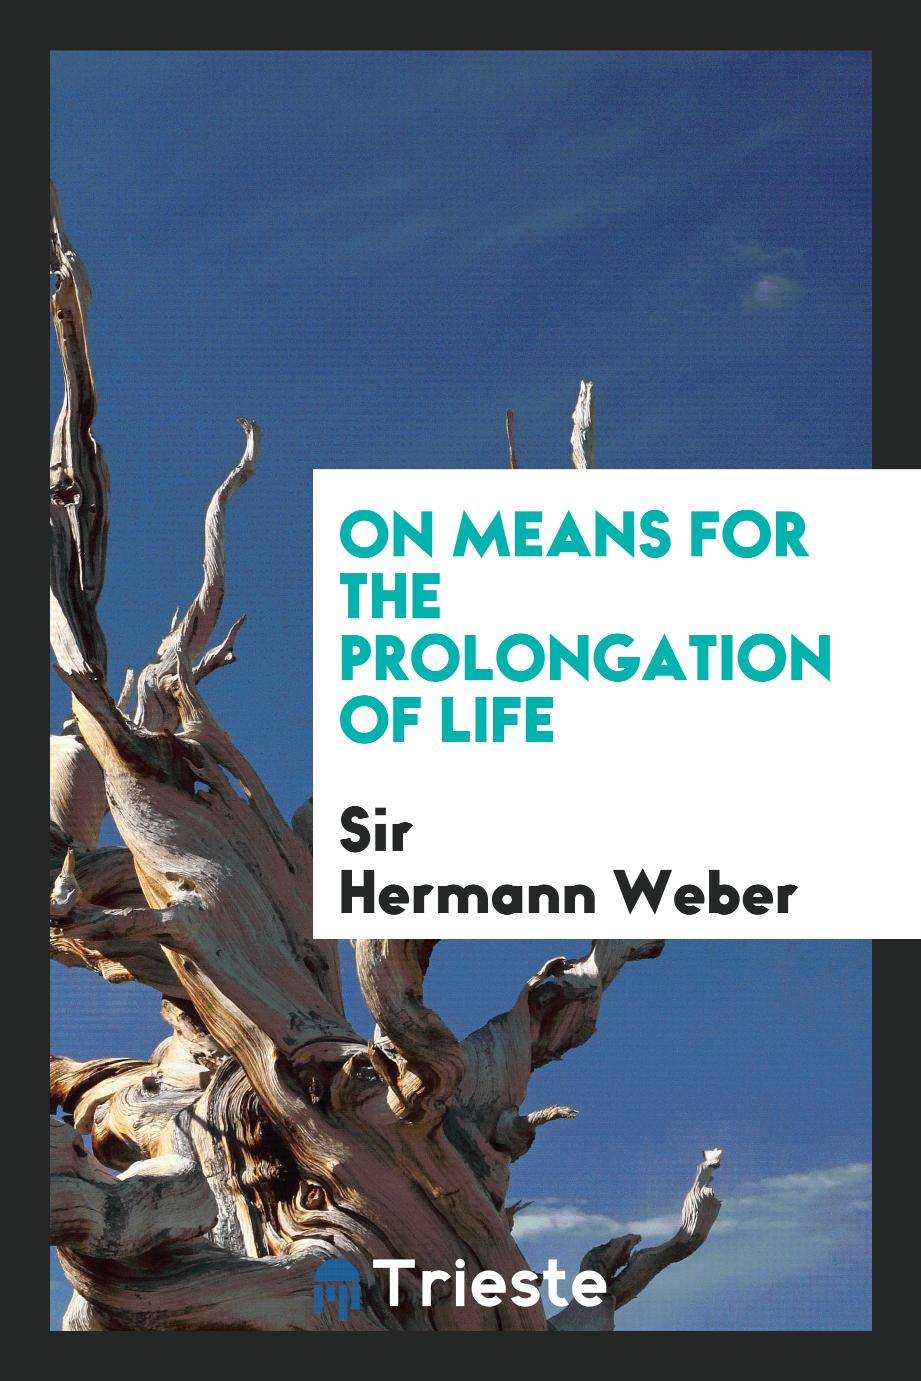 Sir Hermann Weber - On means for the prolongation of life